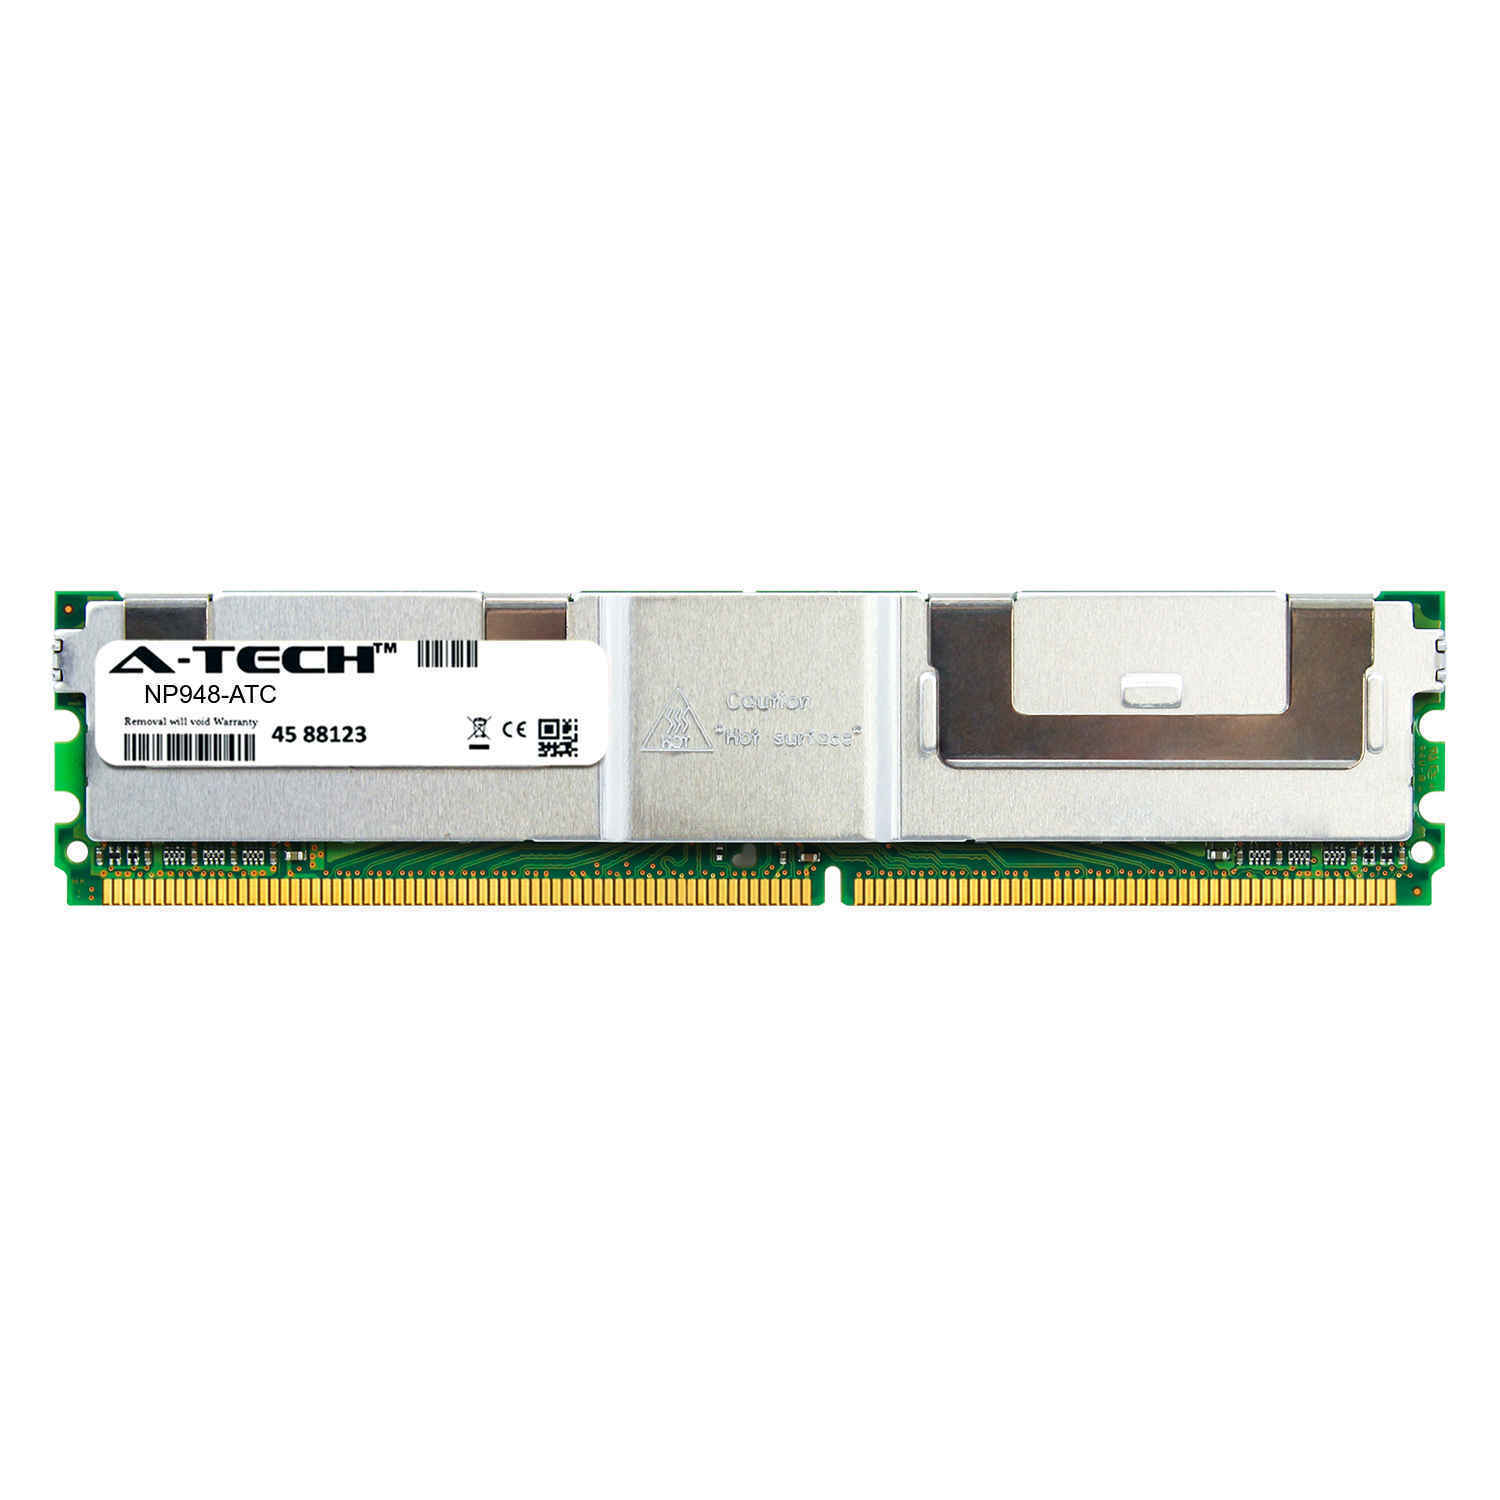 1GB DDR2 PC2-5300F 667MHz FBDIMM (Dell NP948 Equivalent) Server Memory RAM